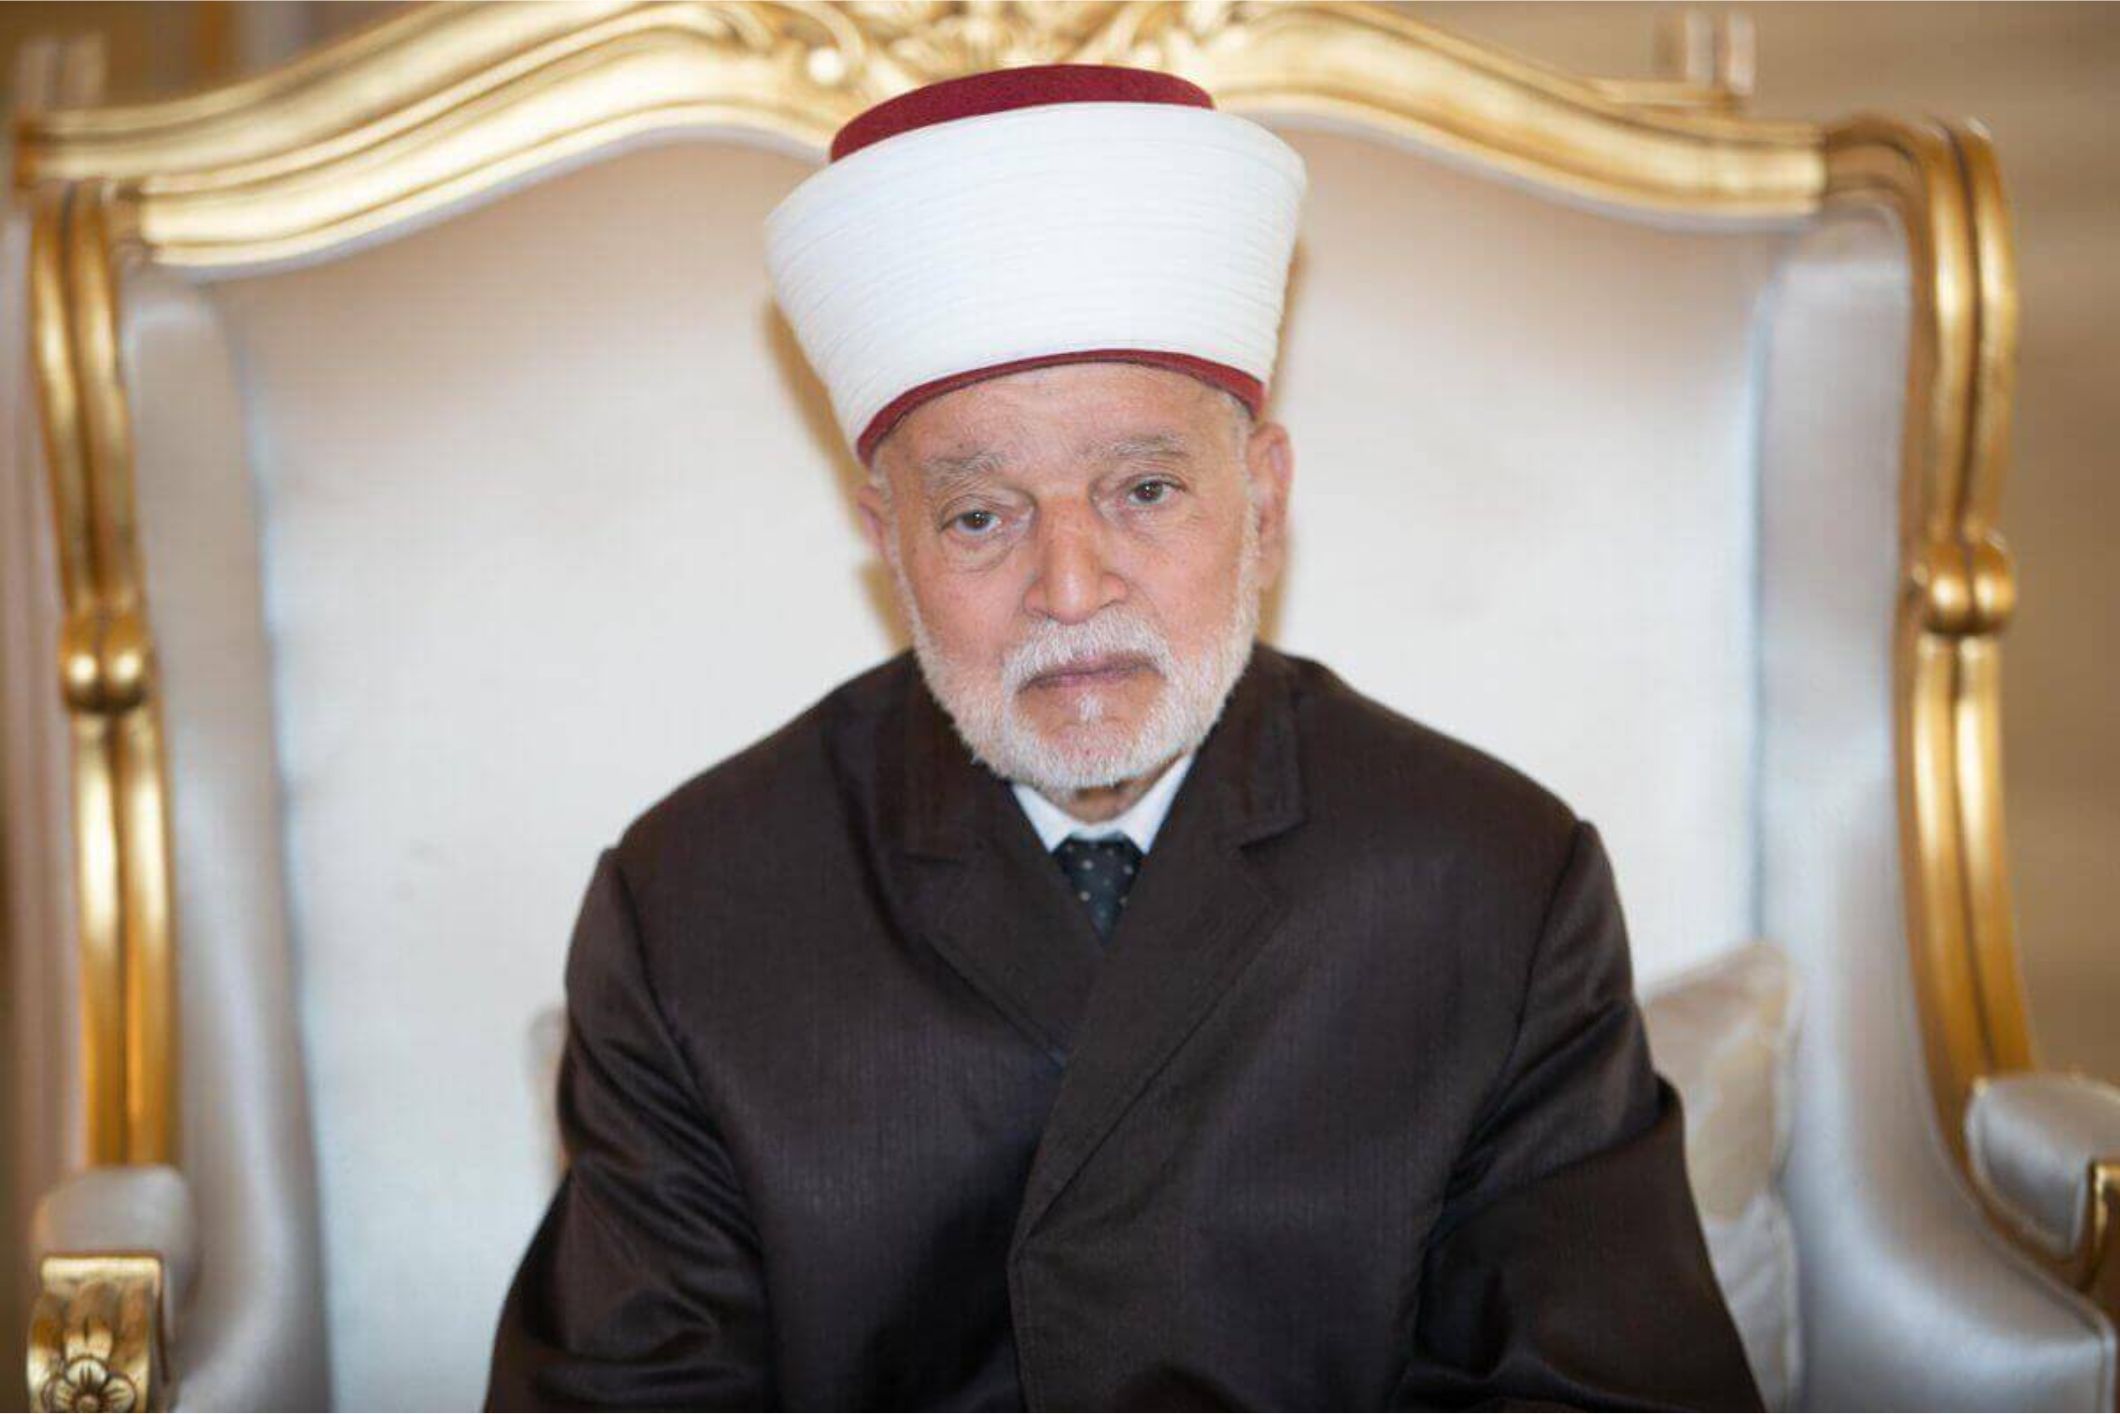 Grand Mufti of Al-Quds, Attacking Islamic sanctities is an Offense